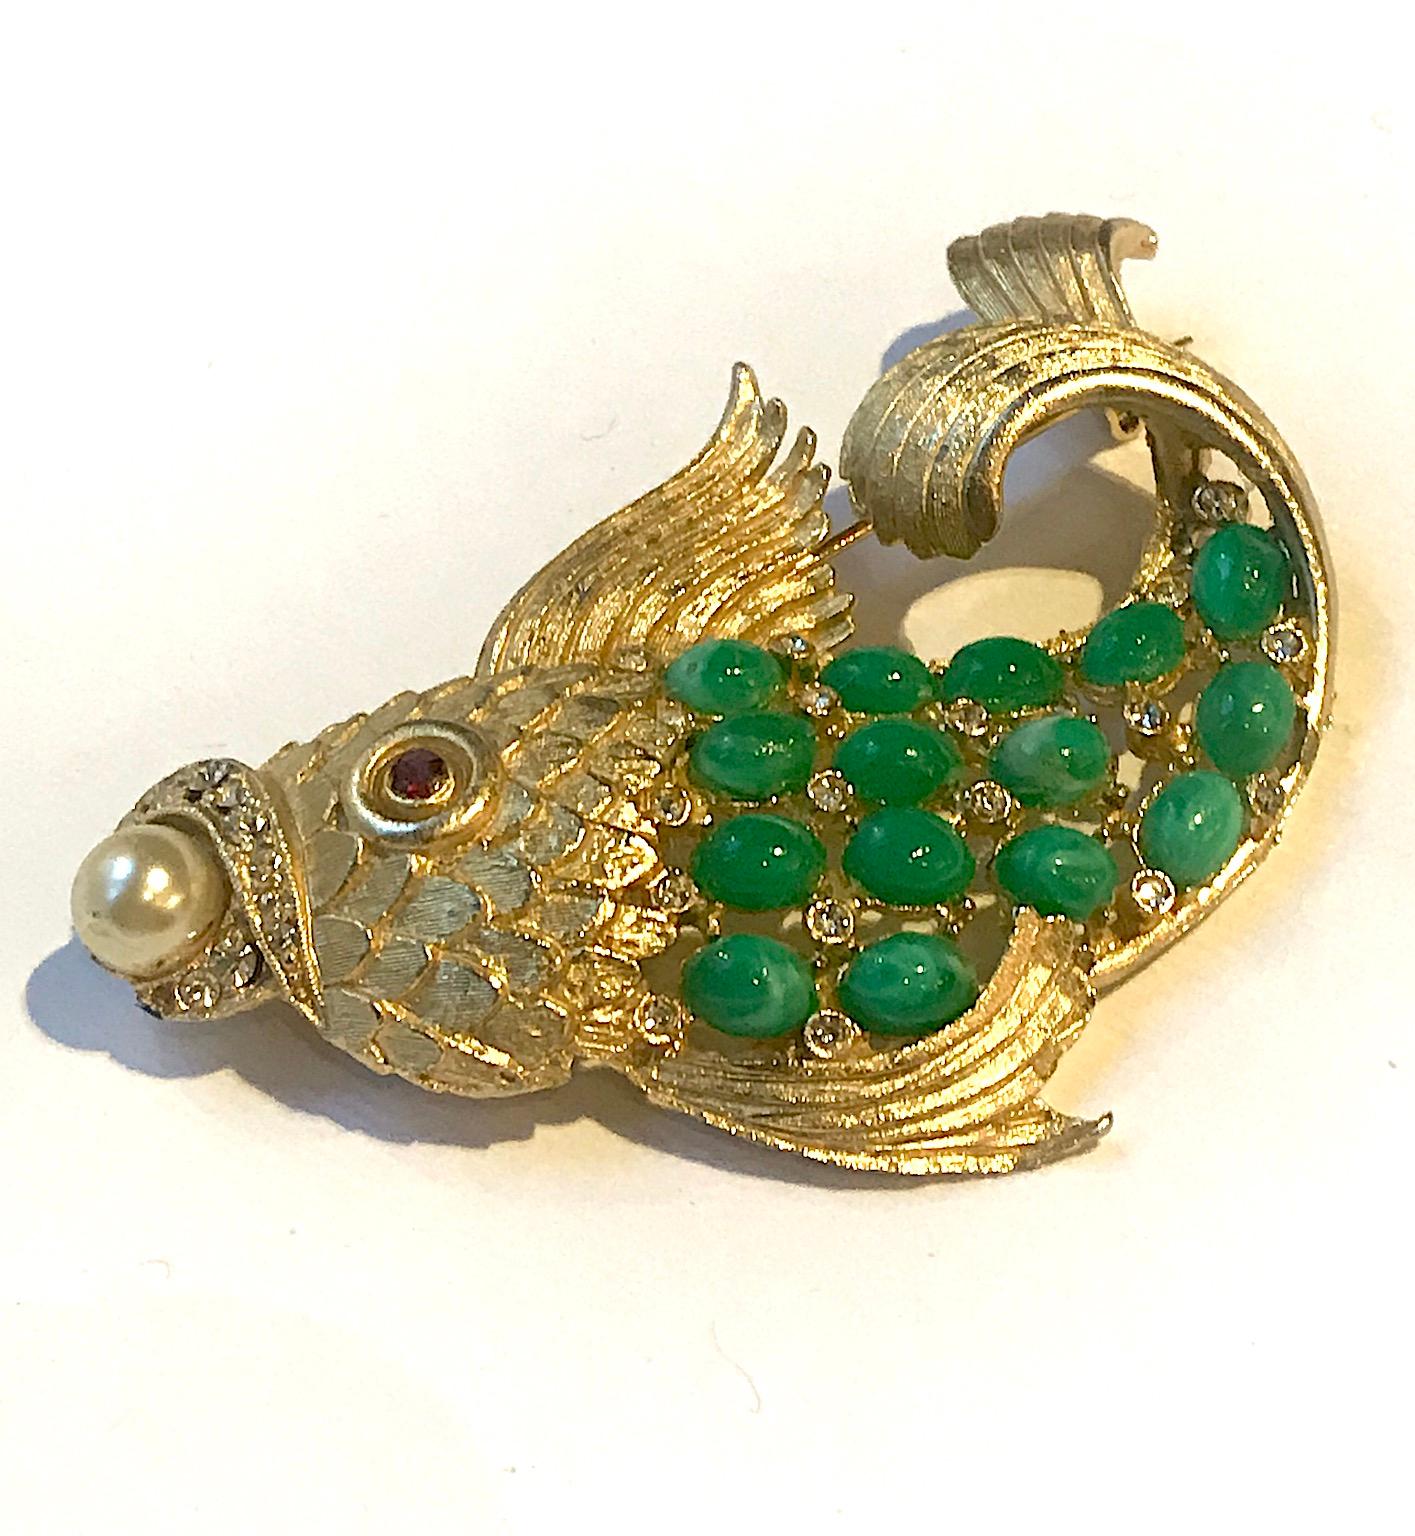 Women's or Men's 1950s Satin Gold Figural Brooch of Fish with Green Cabochon